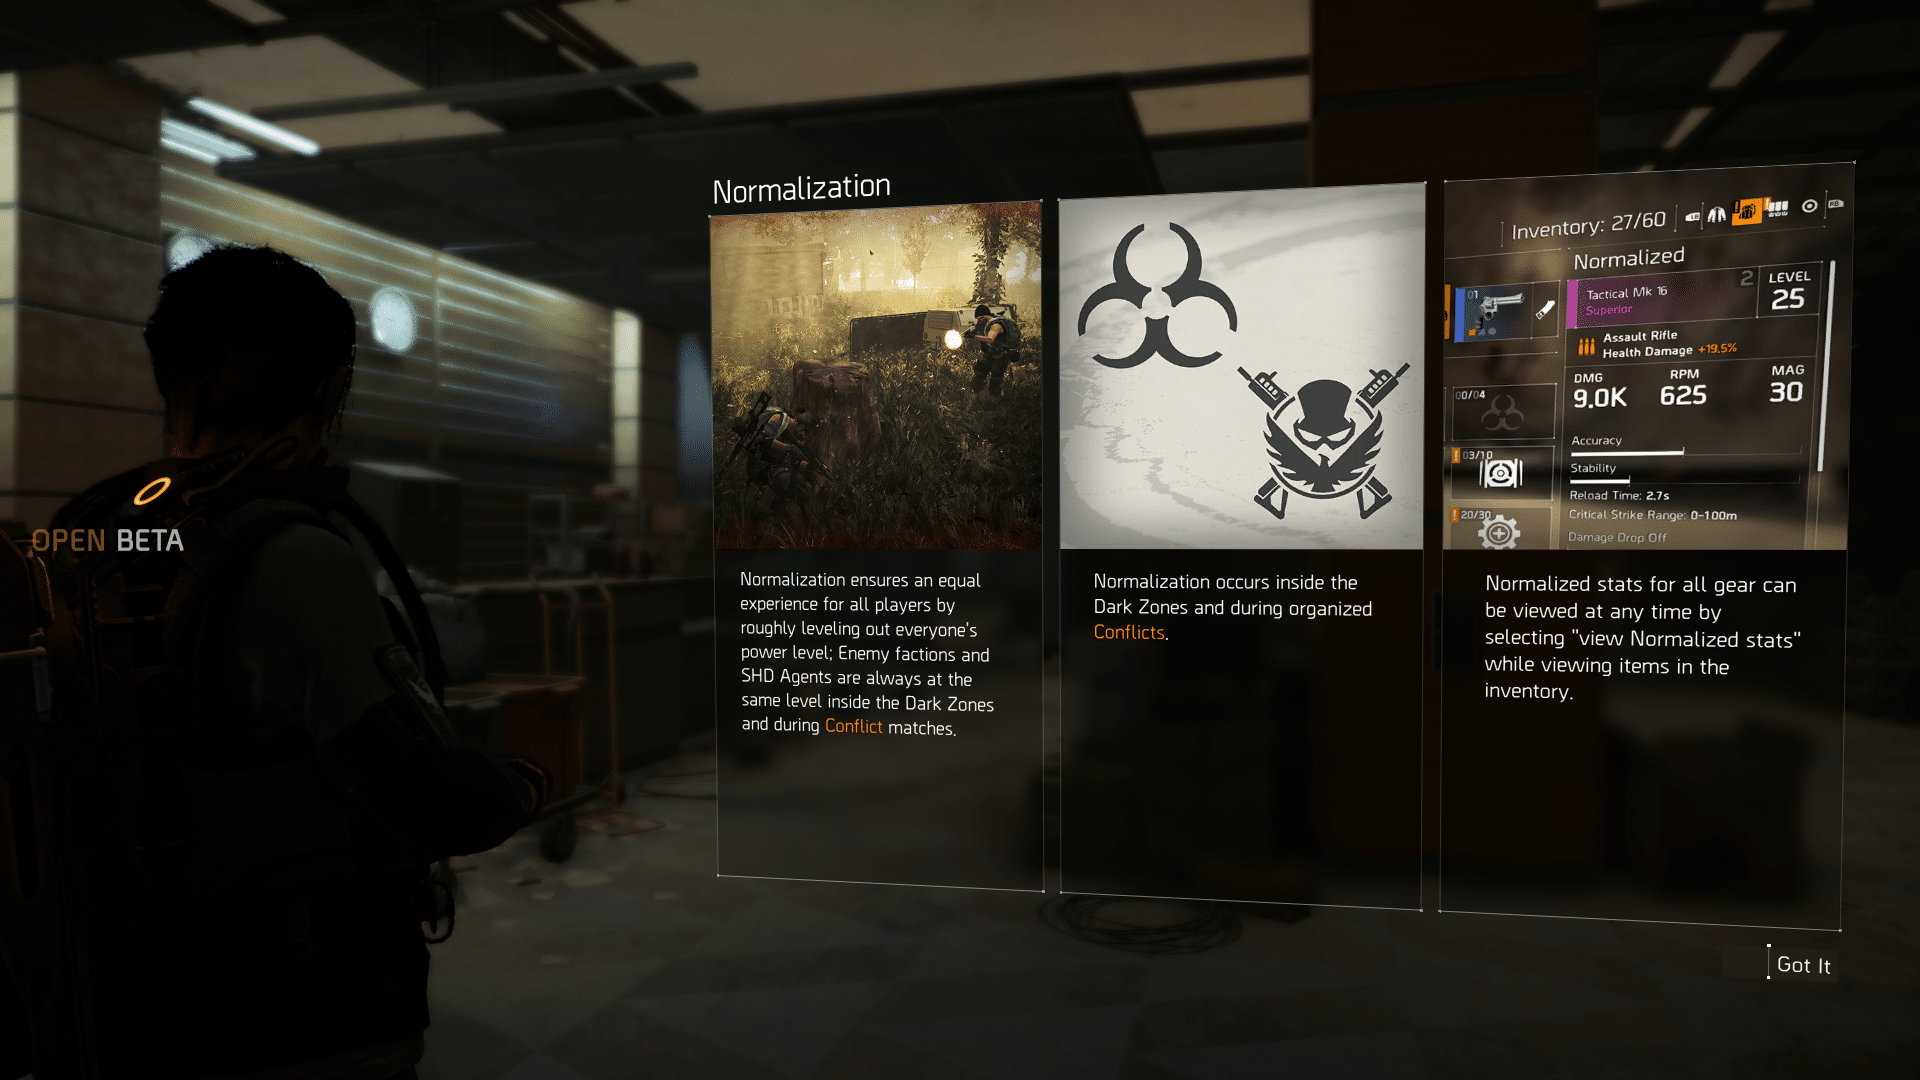 TheDivision2 3 4 2019 8 52 45 PM 395